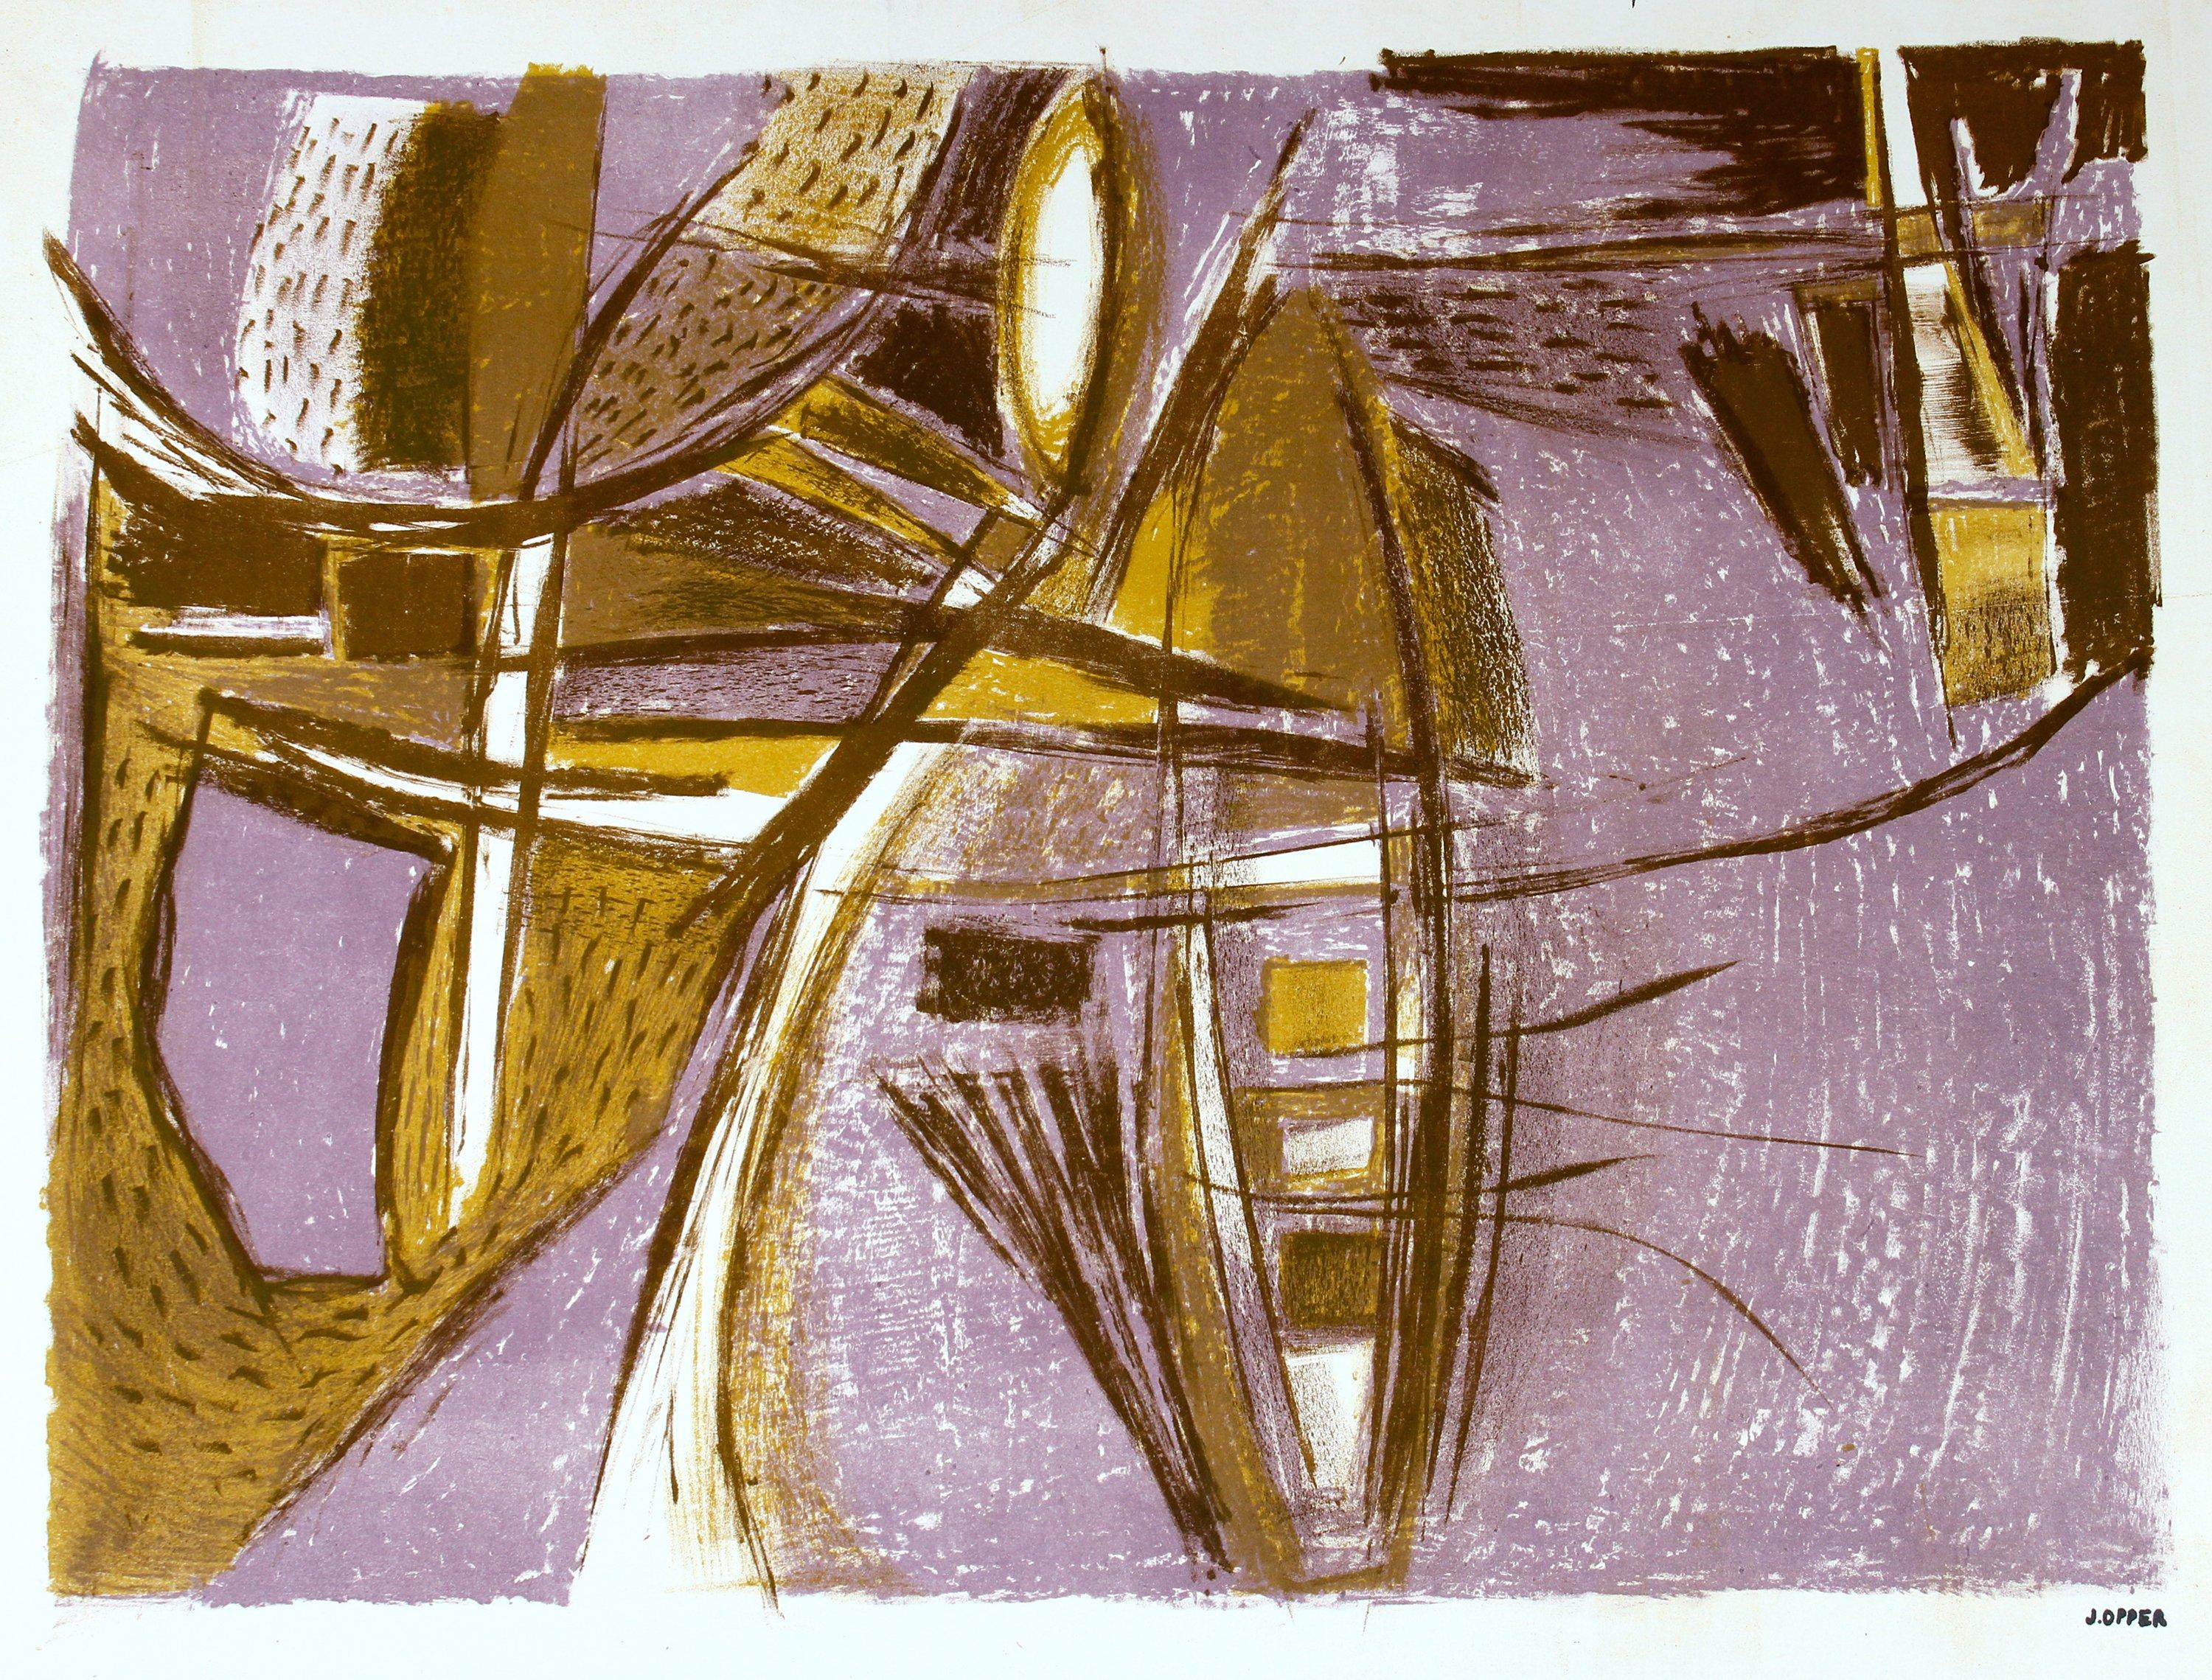 Jerry Opper Abstract Print - Purple and Brown Abstract 1940-50s Lithograph